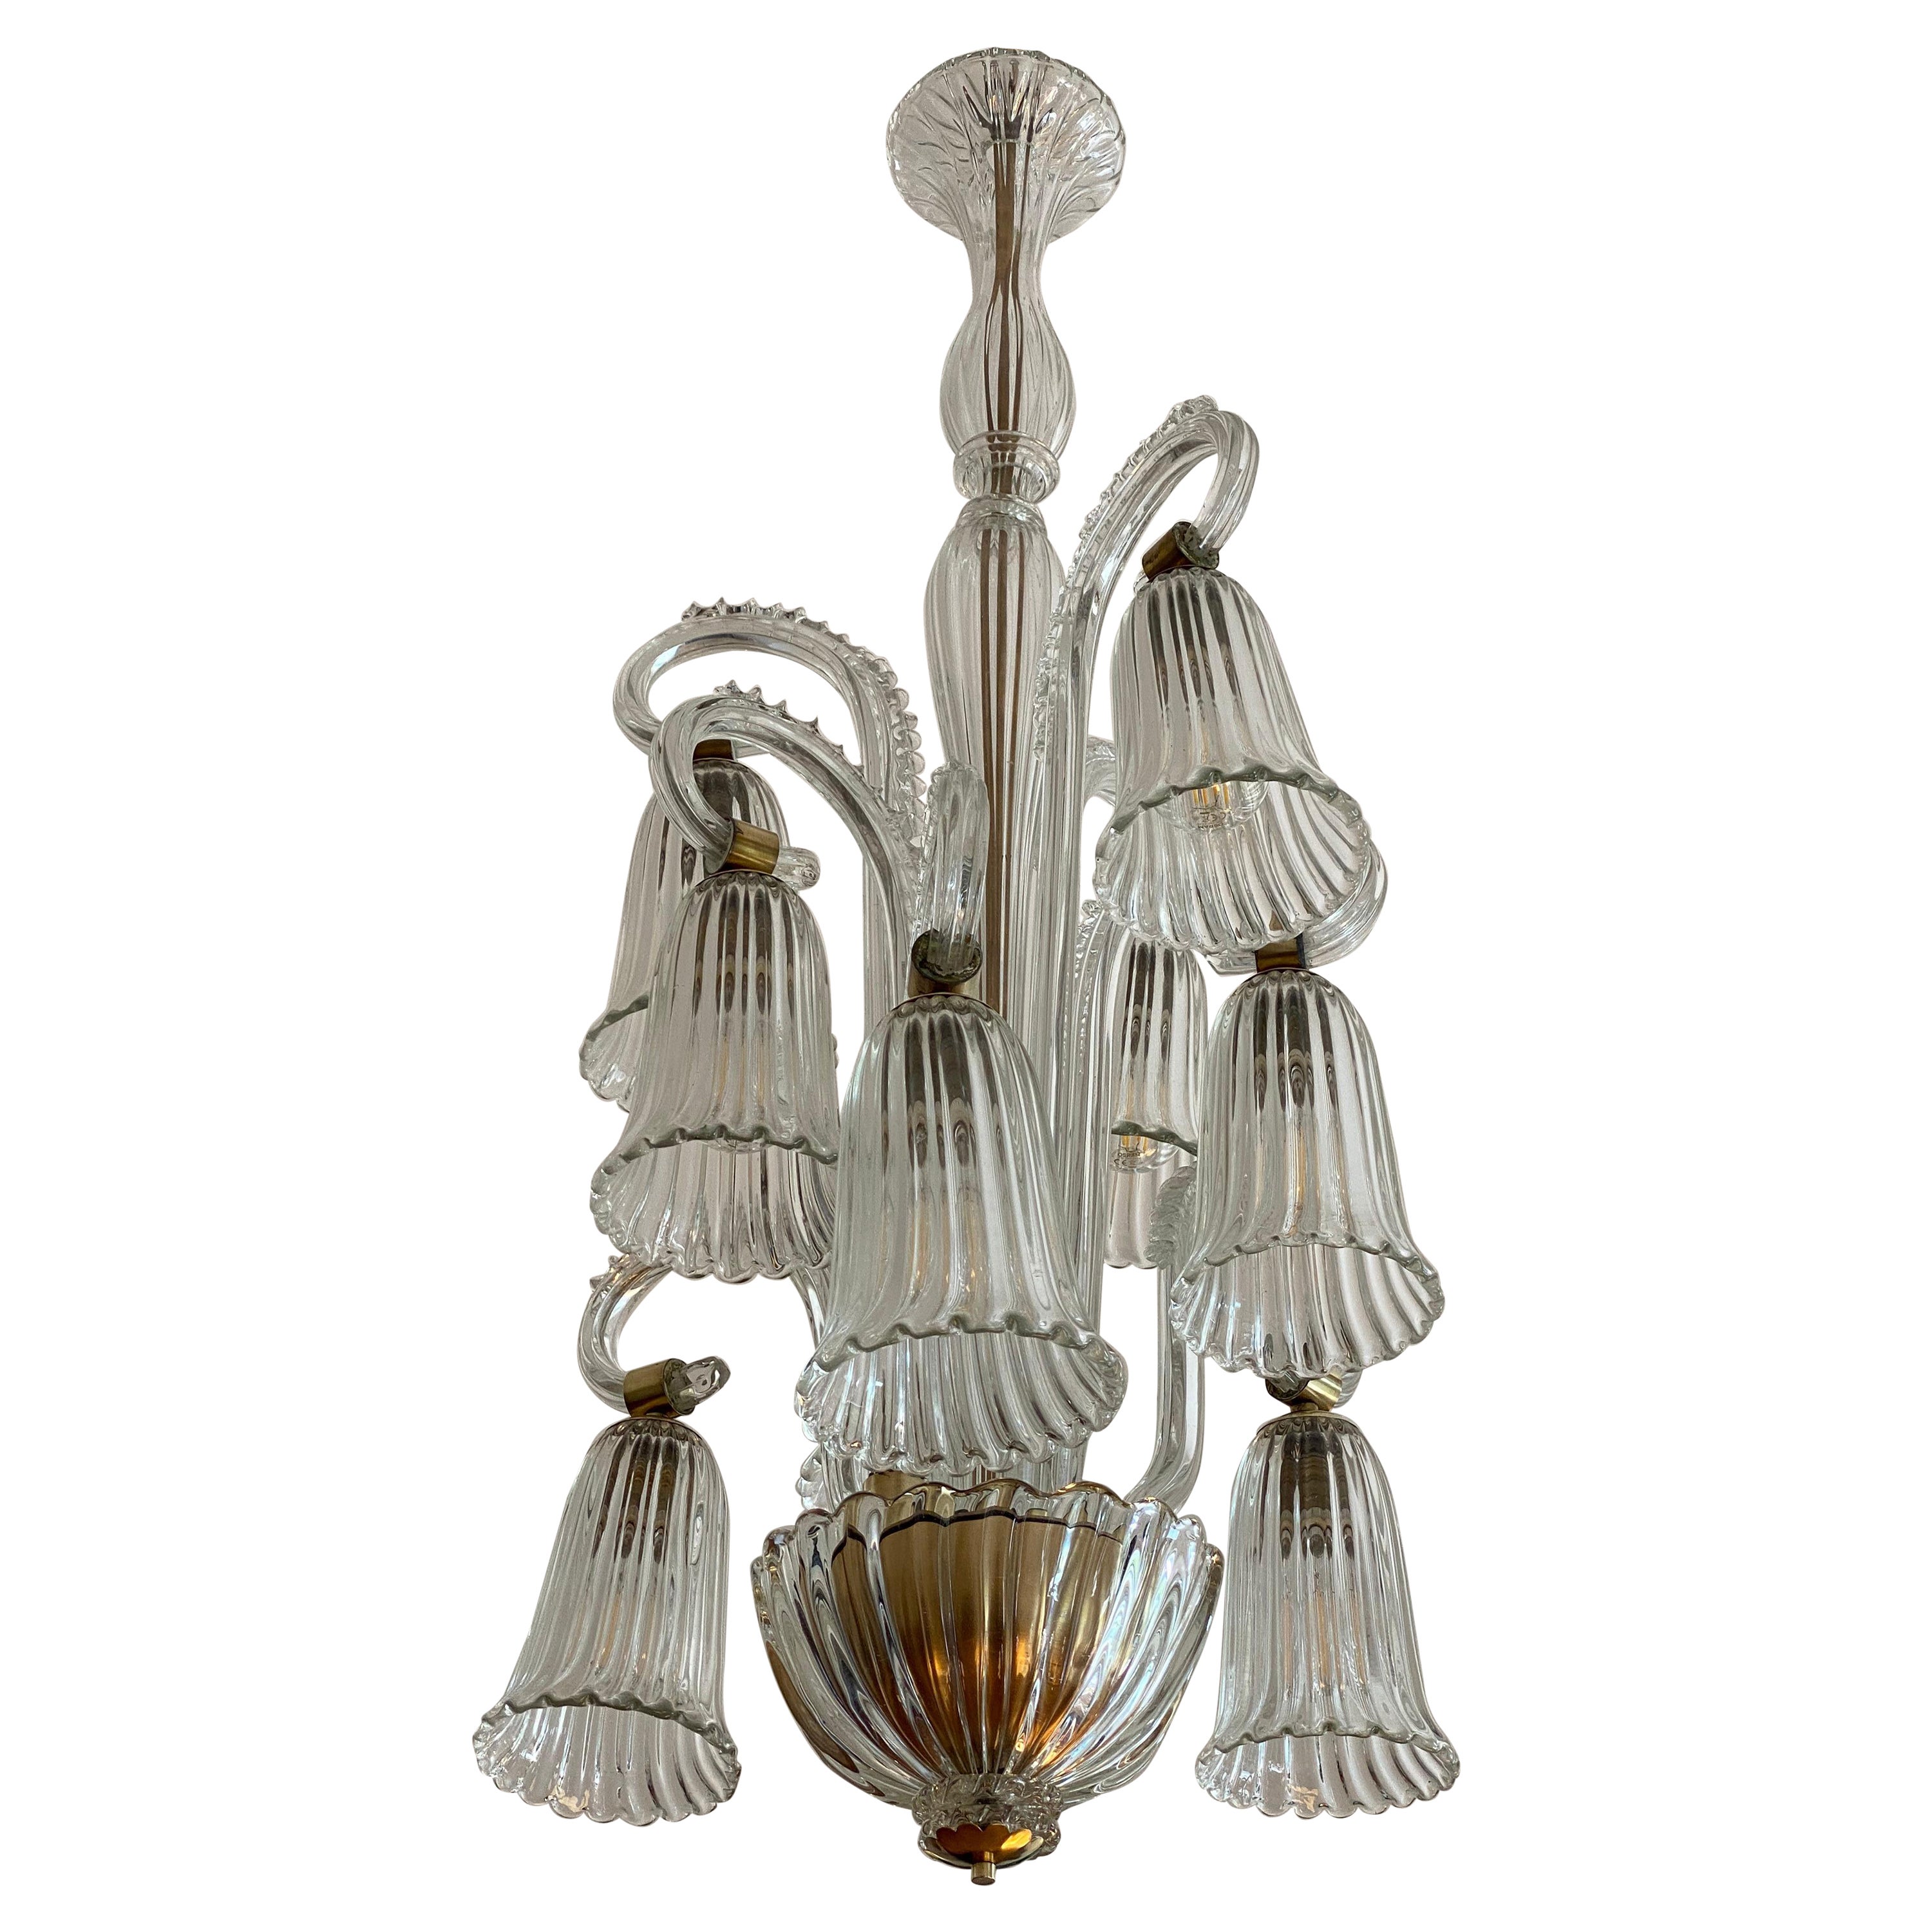 Charming Italian Chandelier by Ercole Barovier, Murano, 1940s For Sale